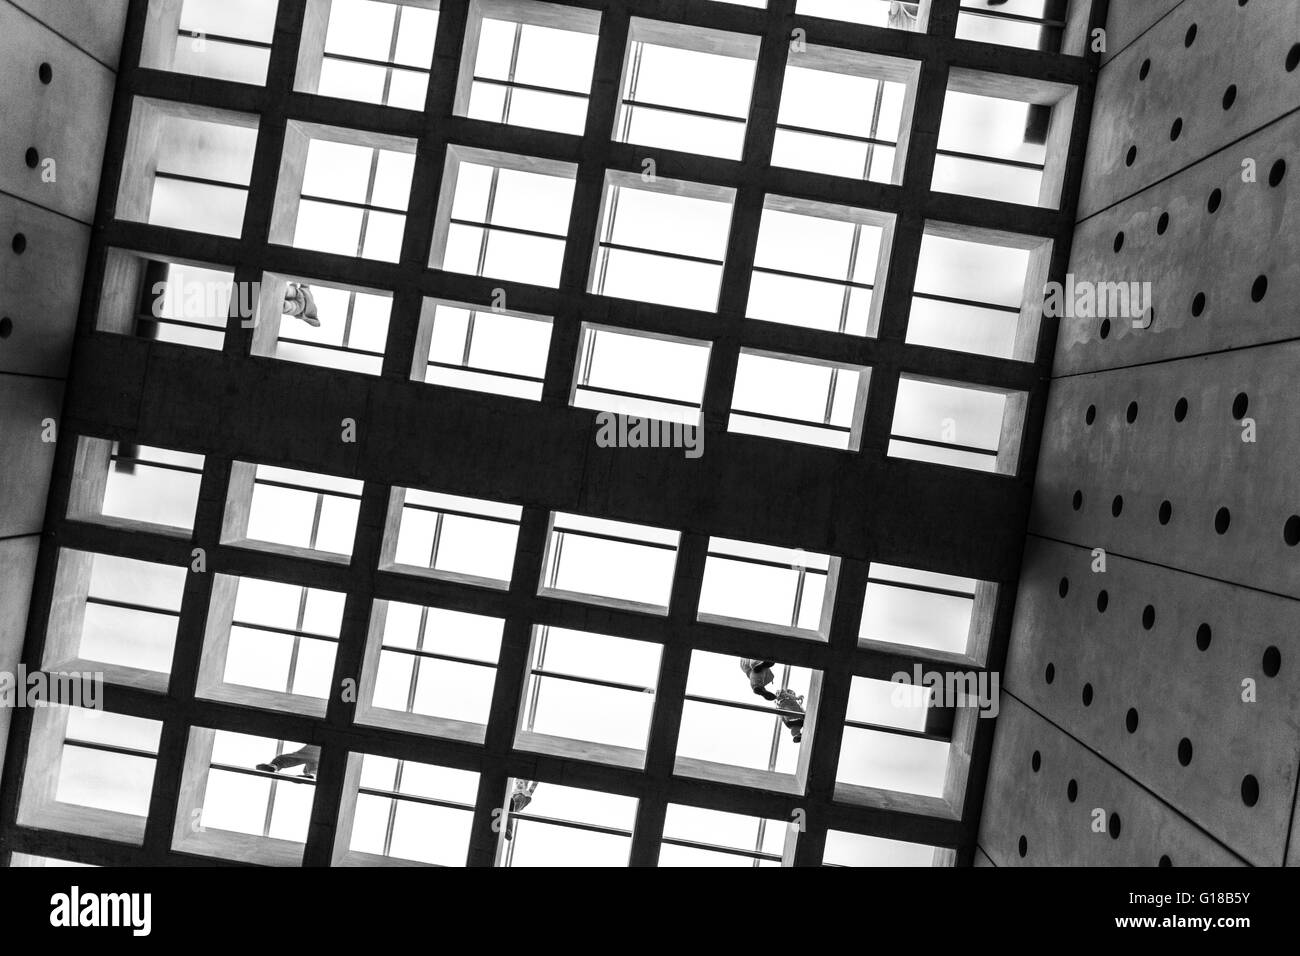 Square floor pattern, glass floor and walking people photographed in Black and White in the  Acropolis museum. Stock Photo